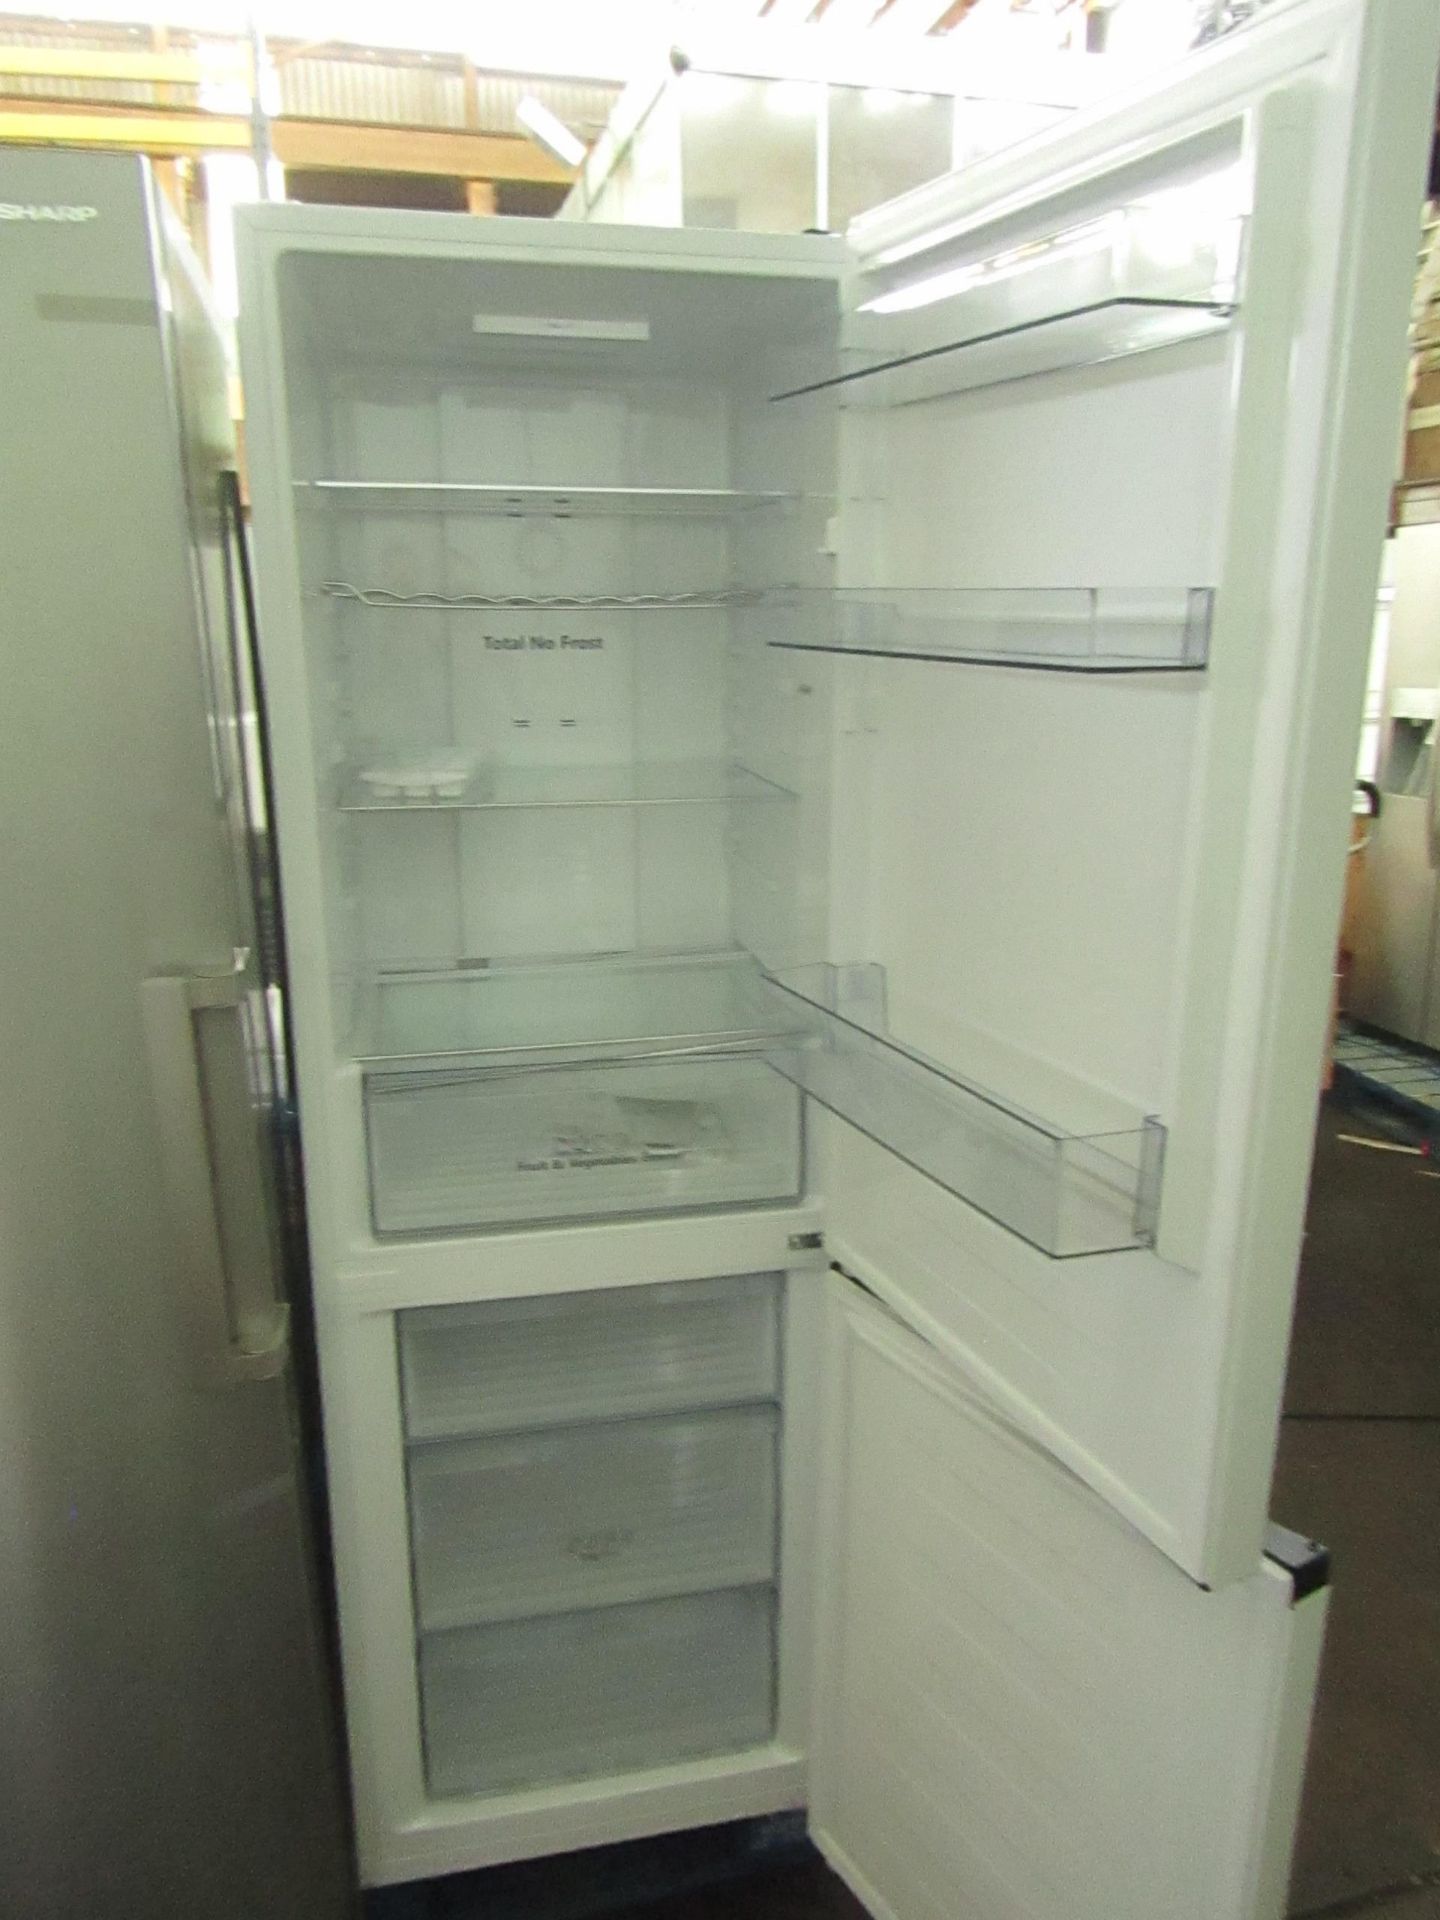 Hisense 60/40 Fridge freezer, Powers on and gets cold in both fridge and freezer, has a small - Image 2 of 4